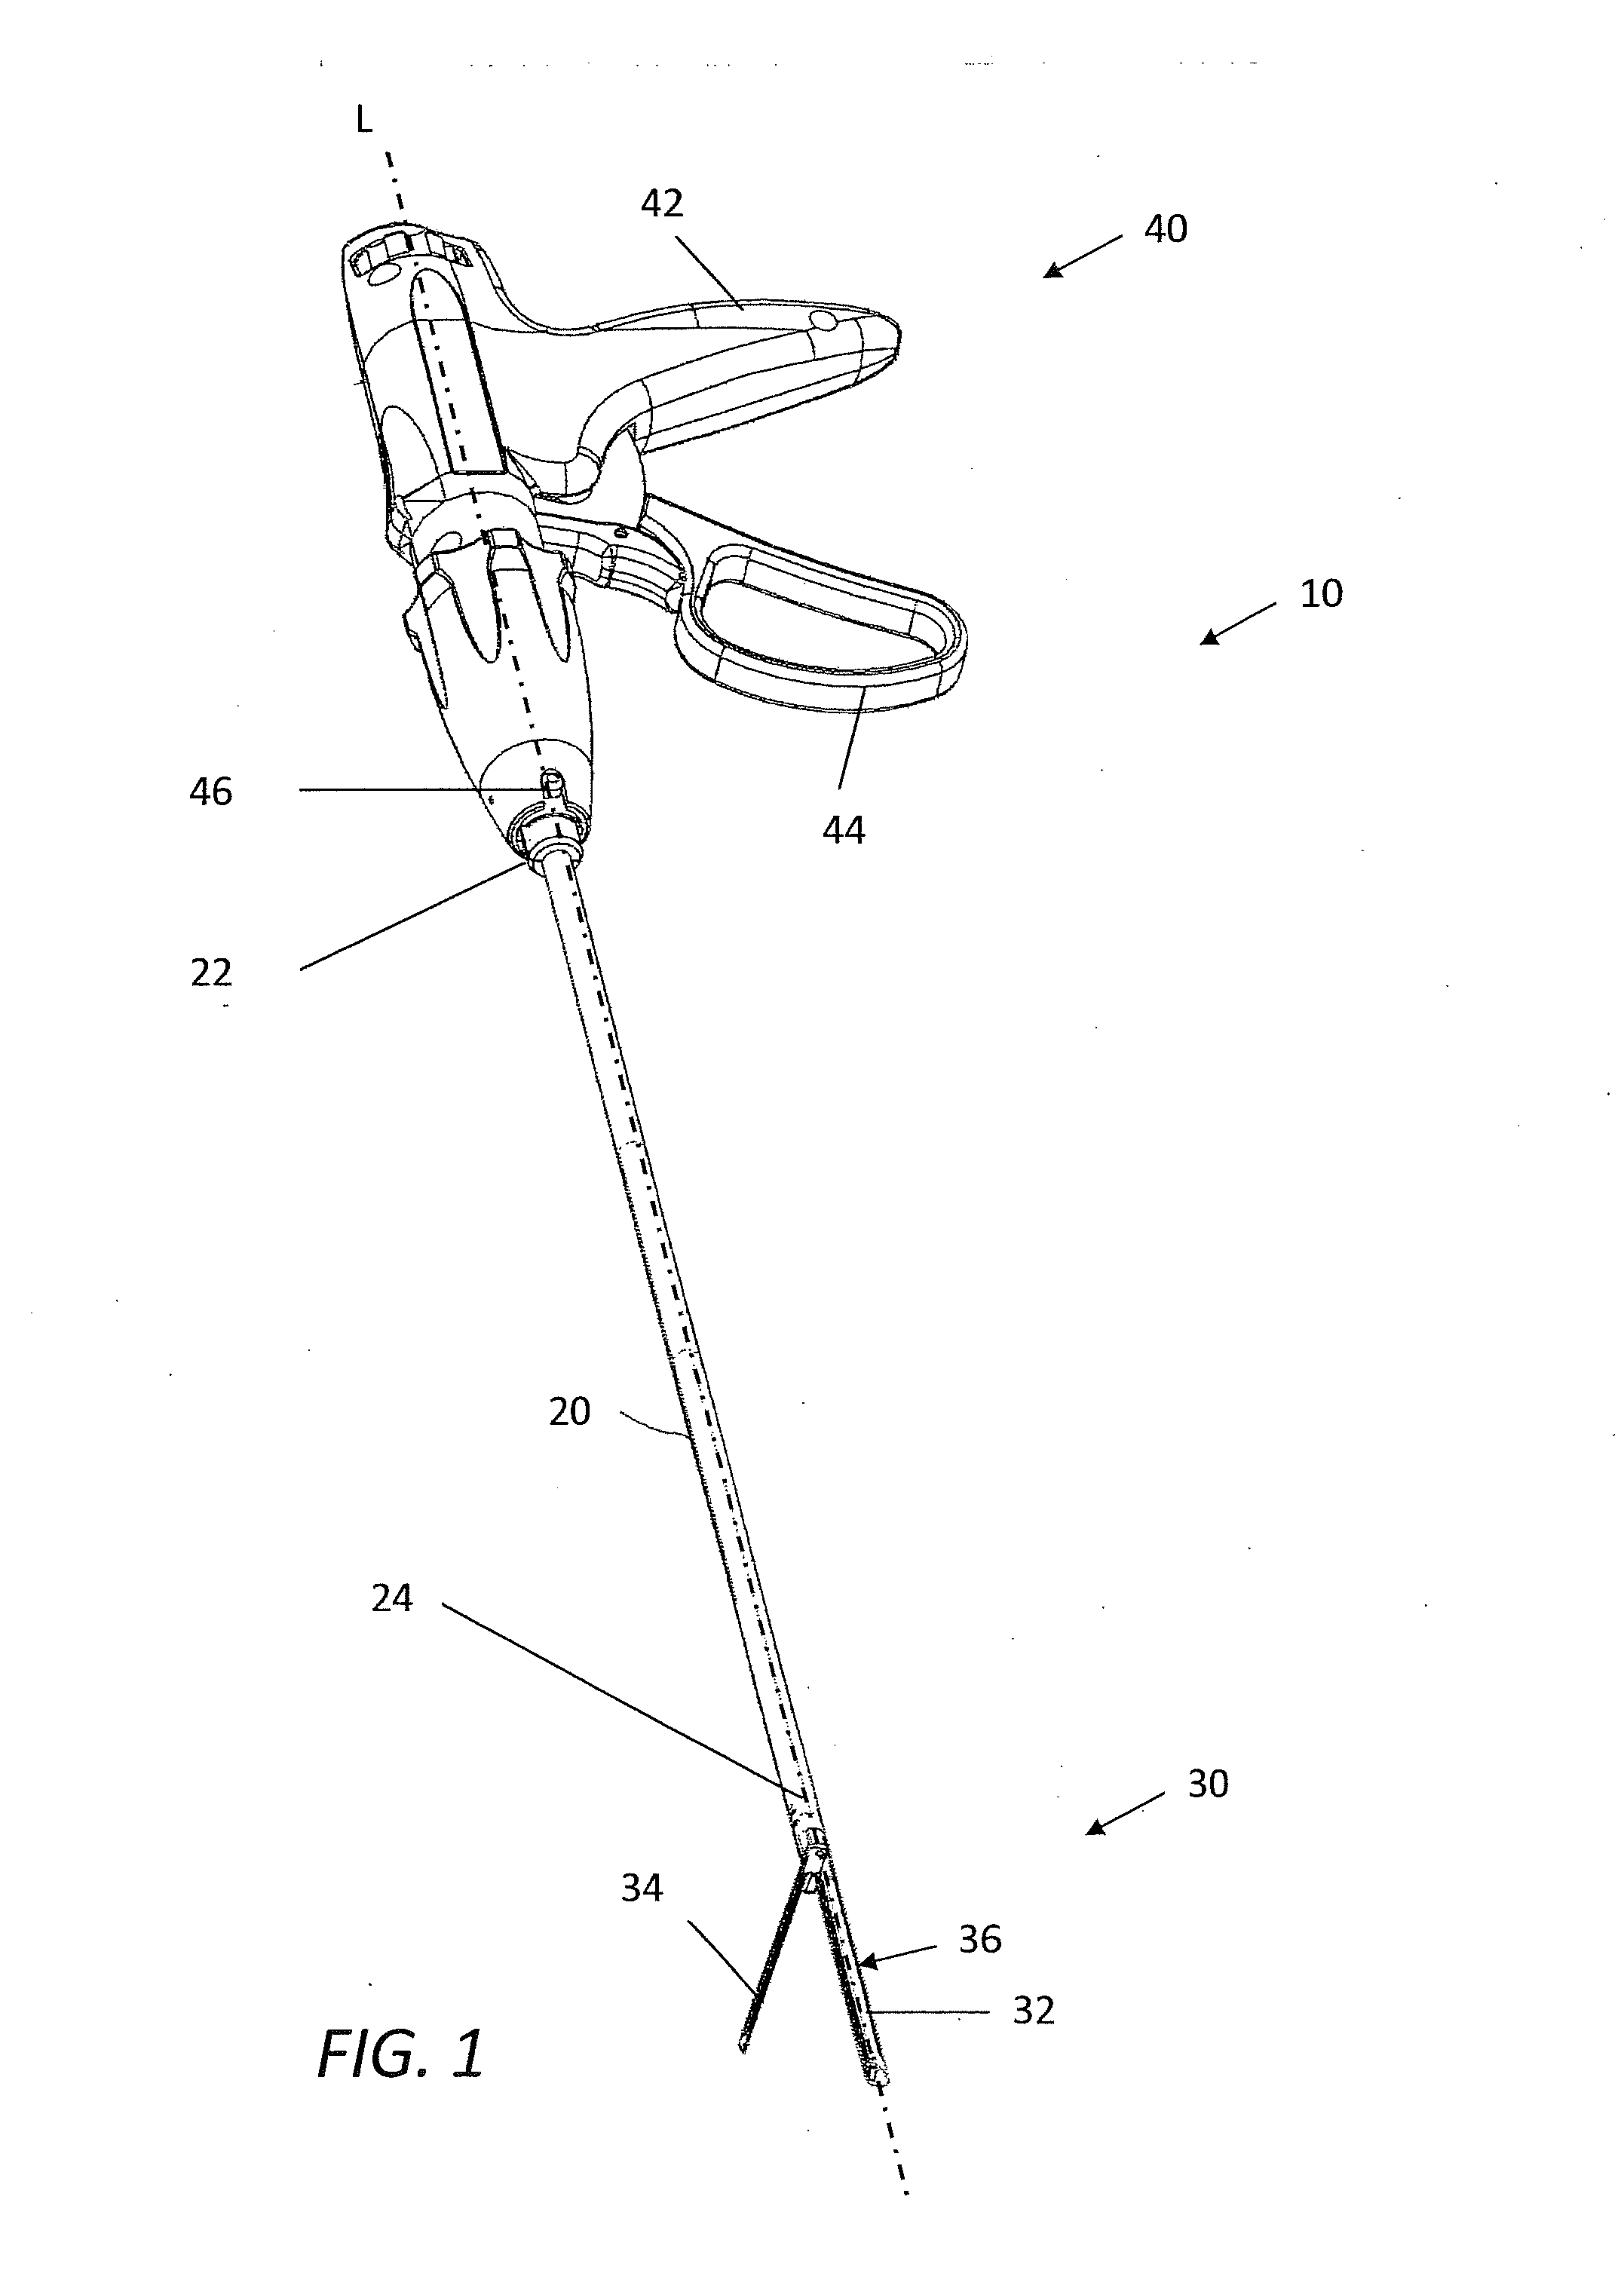 Surgical stapler with expandable jaw